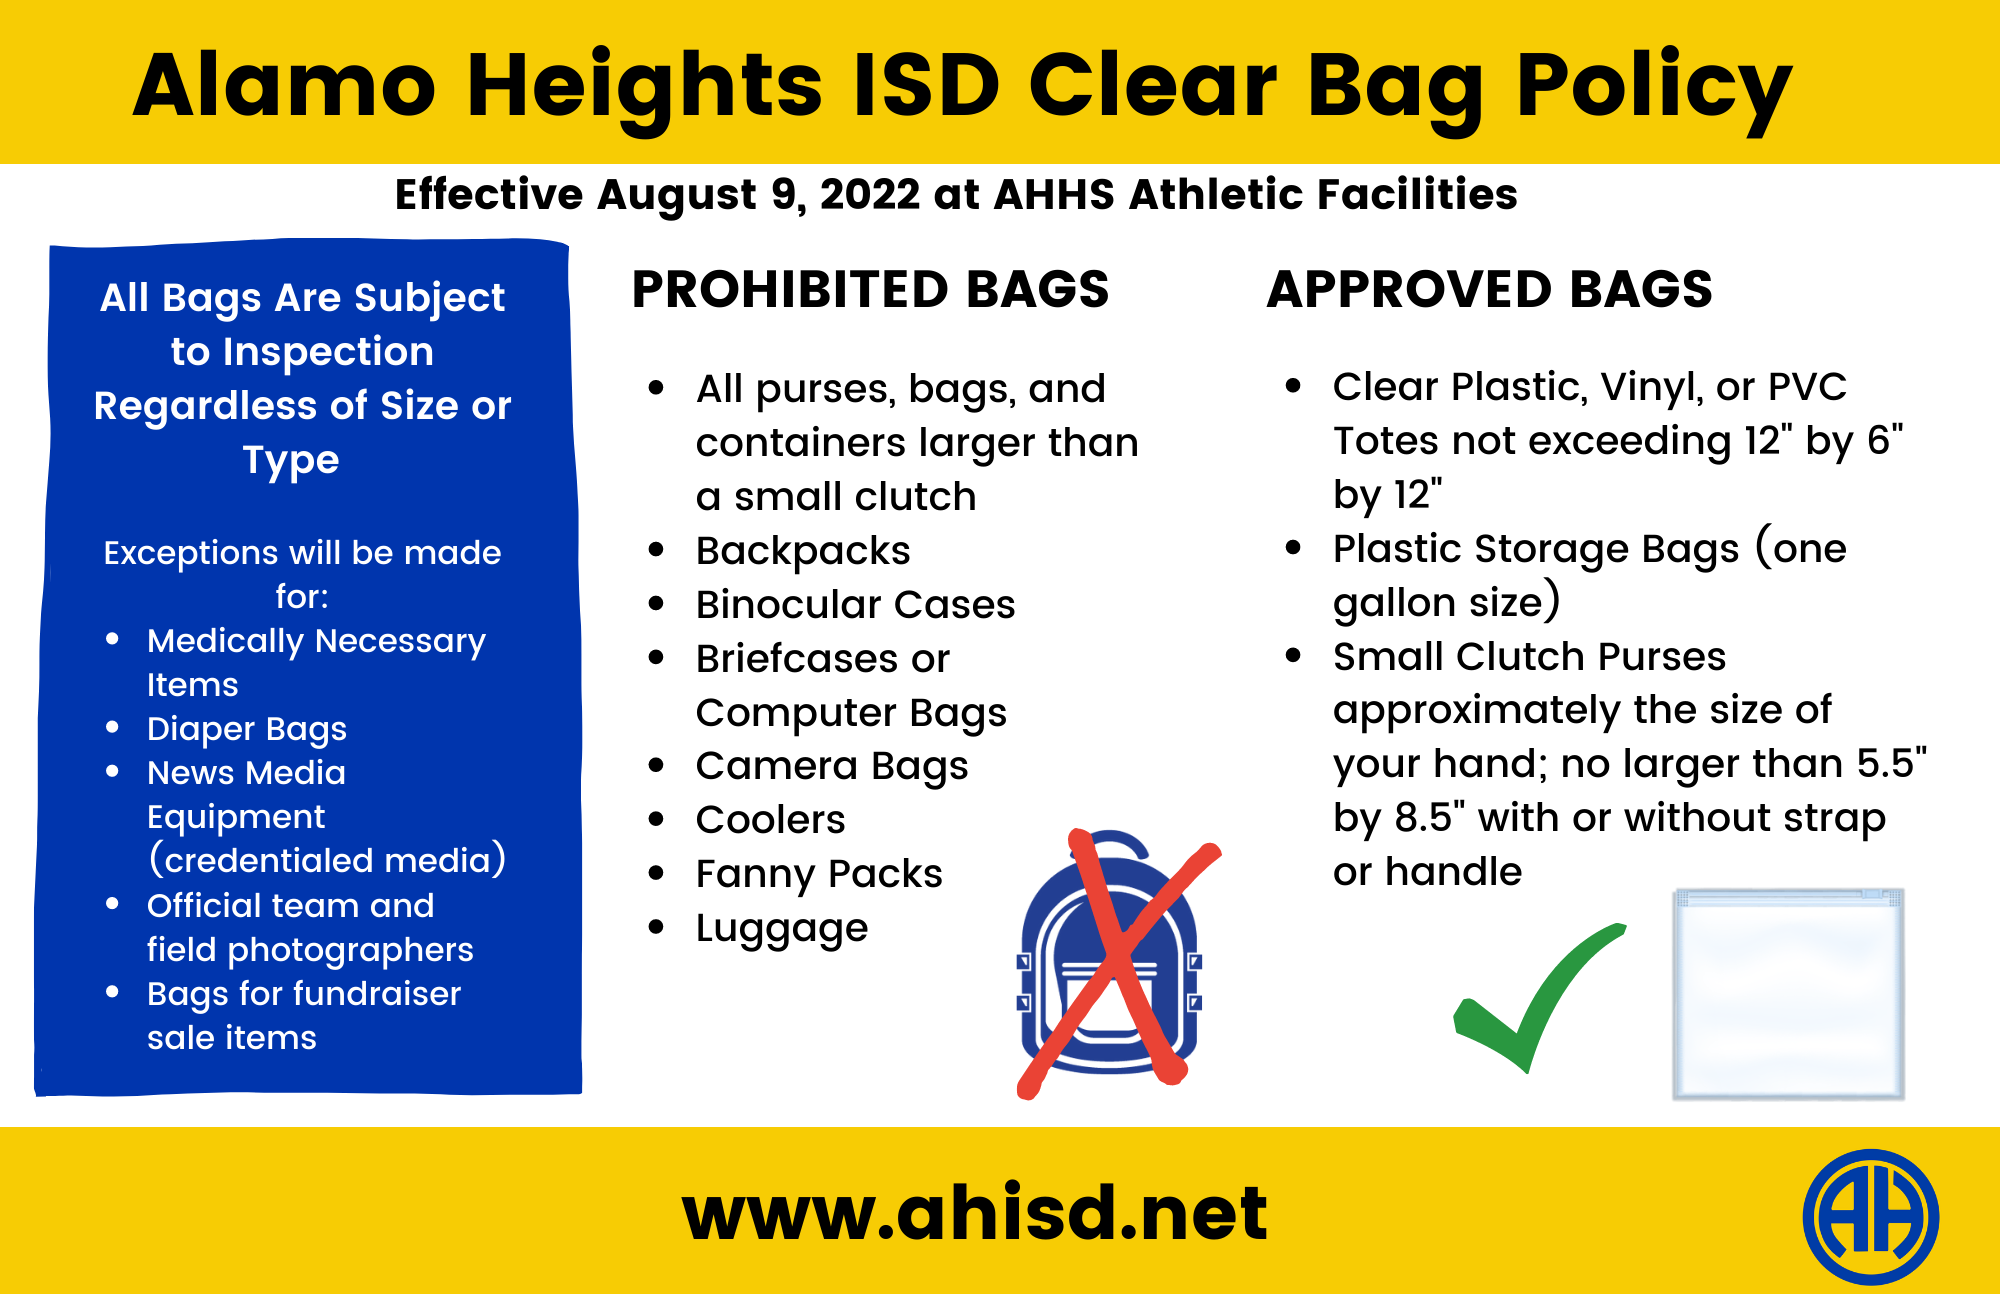 Anderson School District 5 implements clear bag policy for athletic events